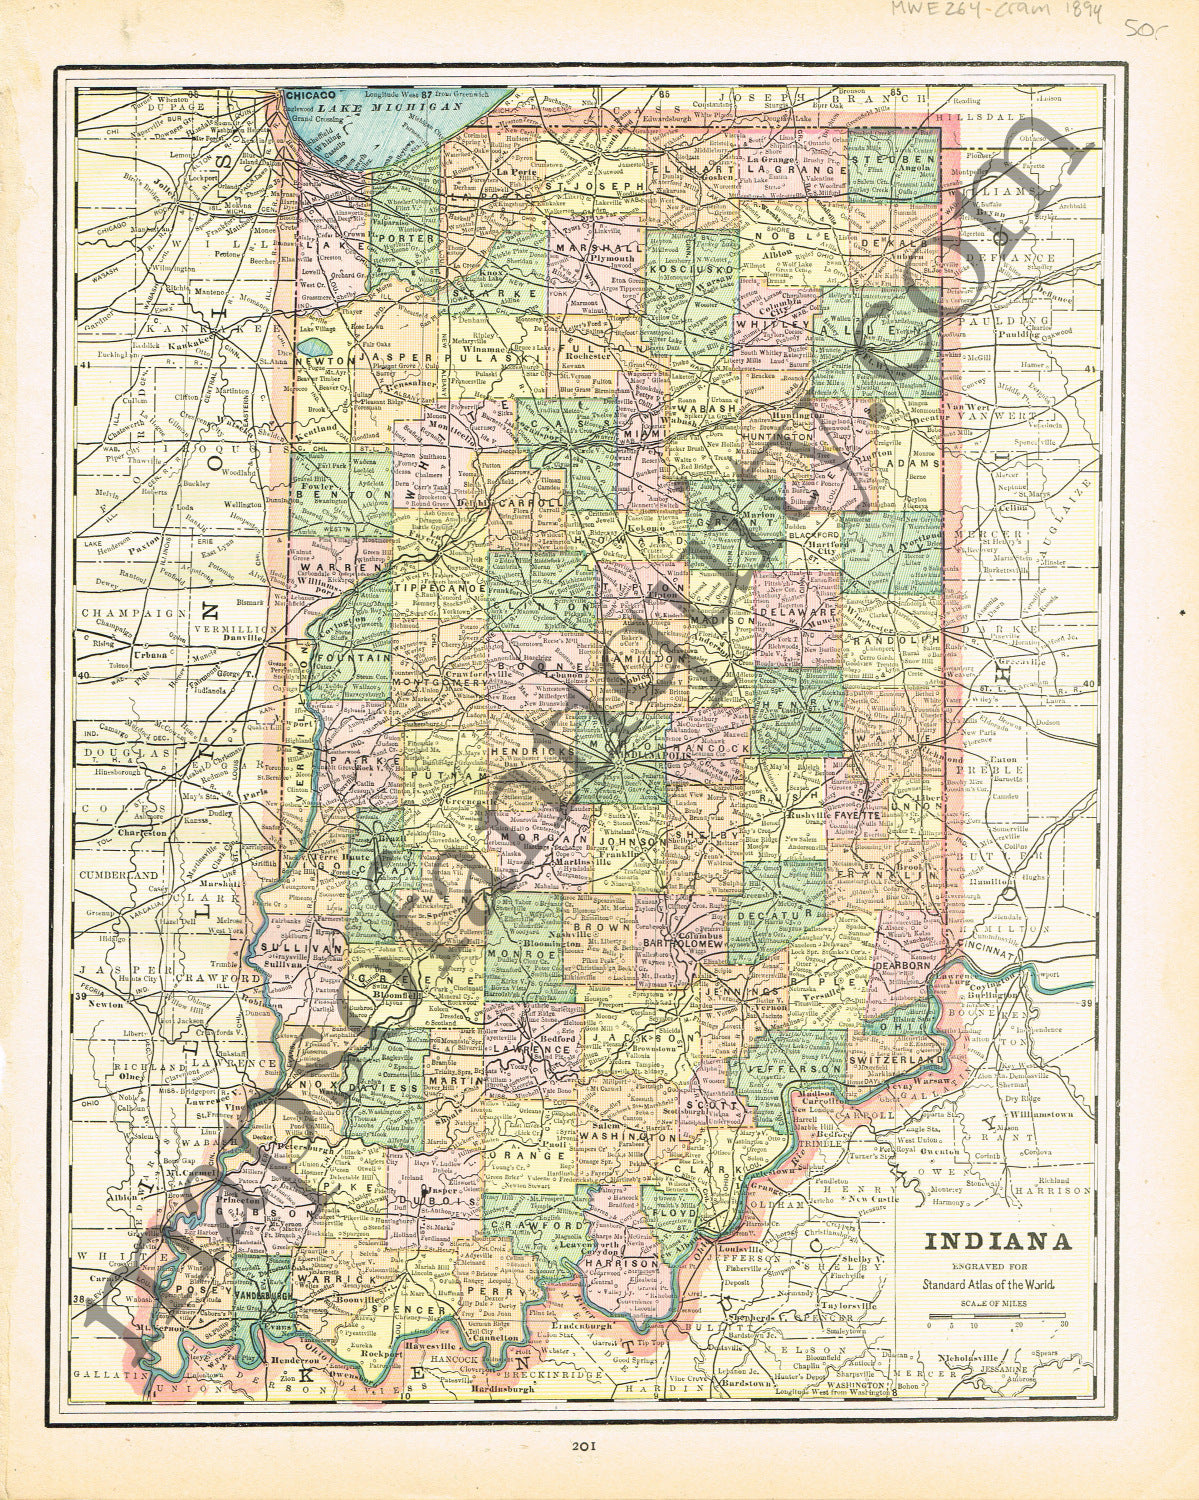 Antique-Printed-Color-Map-Indiana-verso:-Indianapolis-United-States-Midwest-1894-Cram-Maps-Of-Antiquity